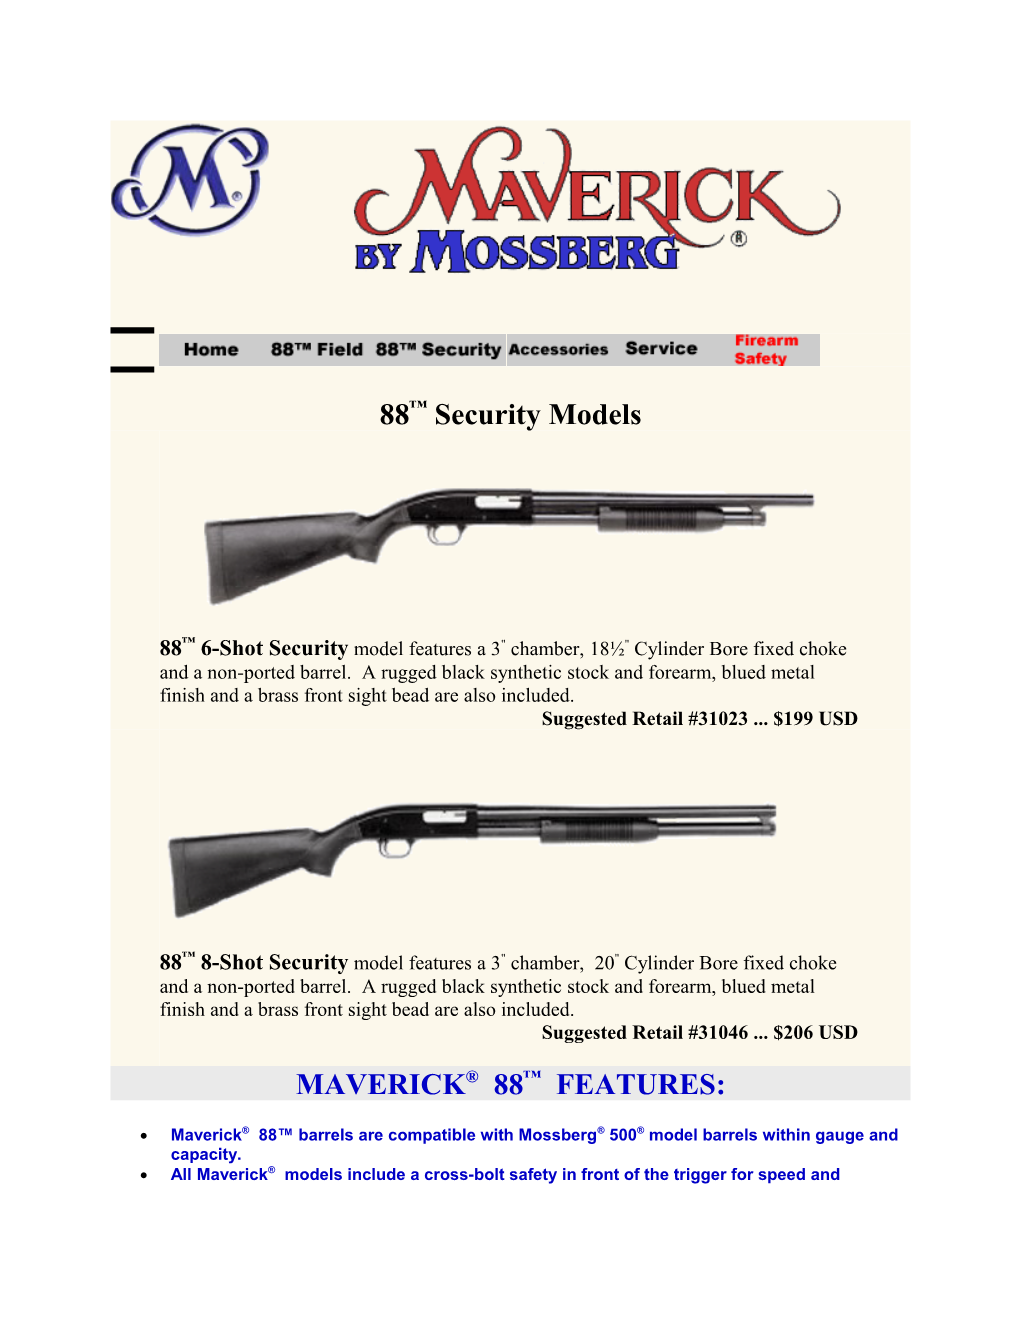 Maverick 88 Barrels Are Compatible with Mossberg 500 Model Barrels Within Gauge and Capacity